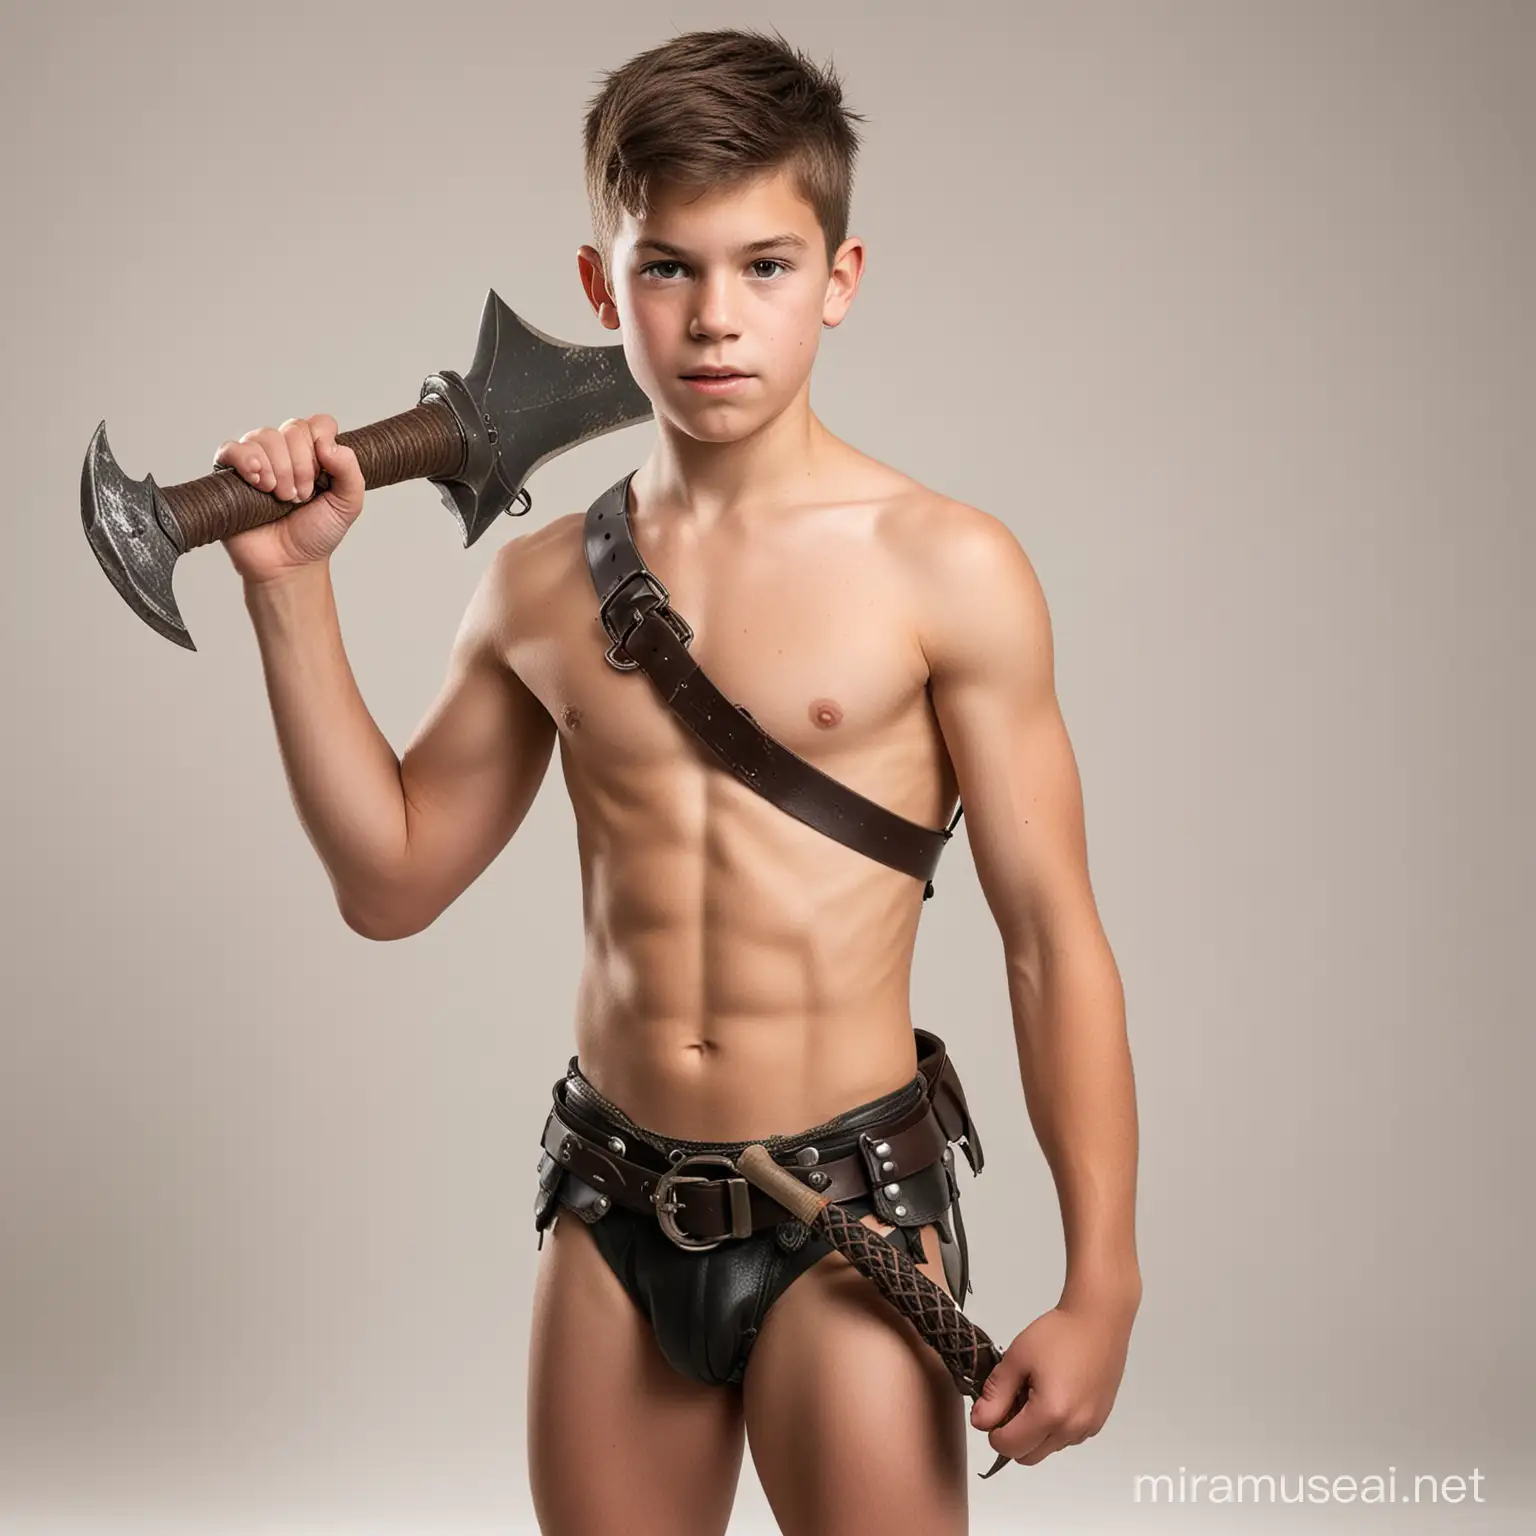 A very young shirtless muscular teenage boy warrior wearing a very short loincloth with a big leather belt, carrying an axe, a bow and a sword, white background.